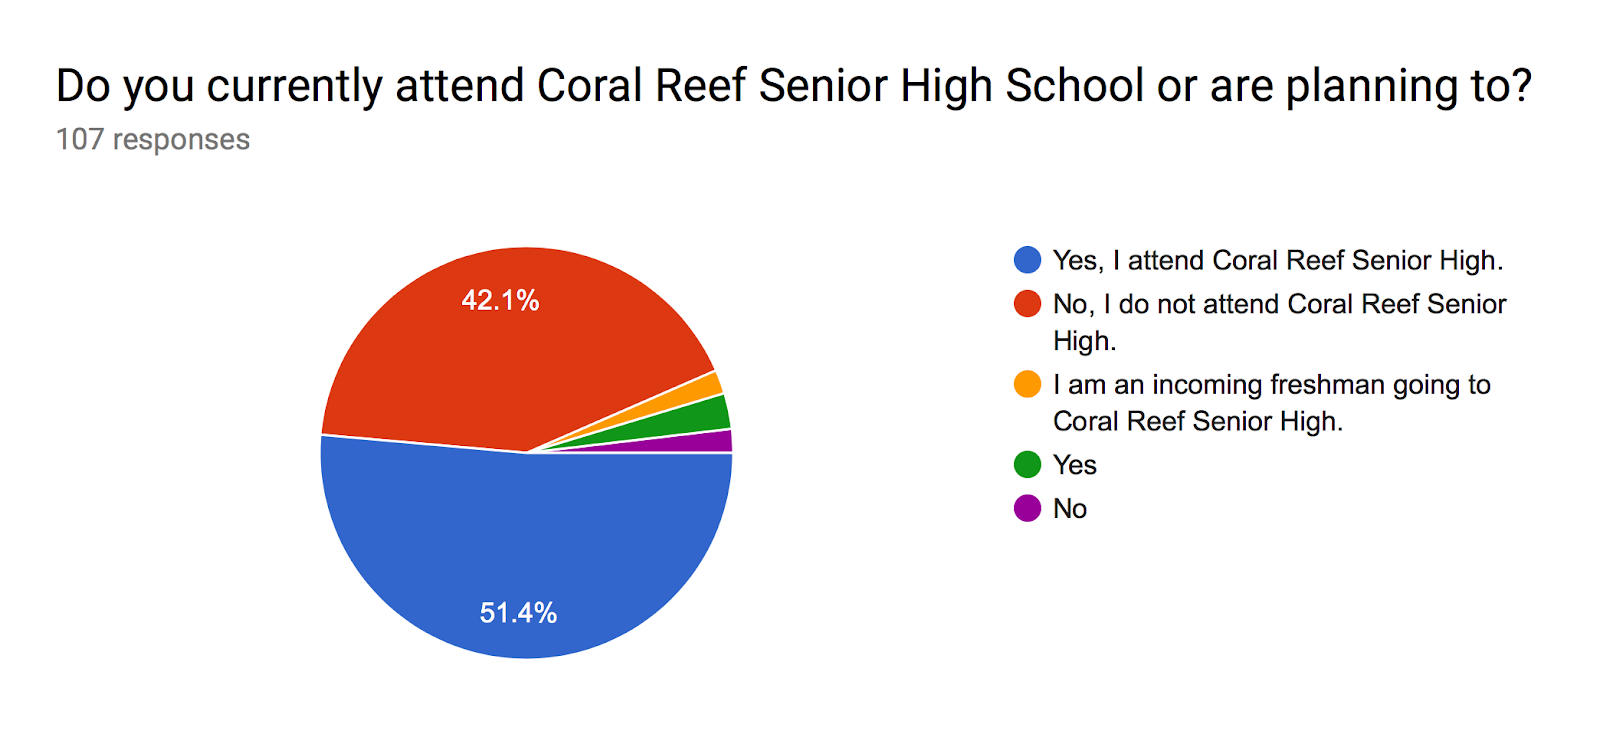 Forms response chart. Question title: Do you currently attend Coral Reef Senior High School or are planning to? . Number of responses: 107 responses.